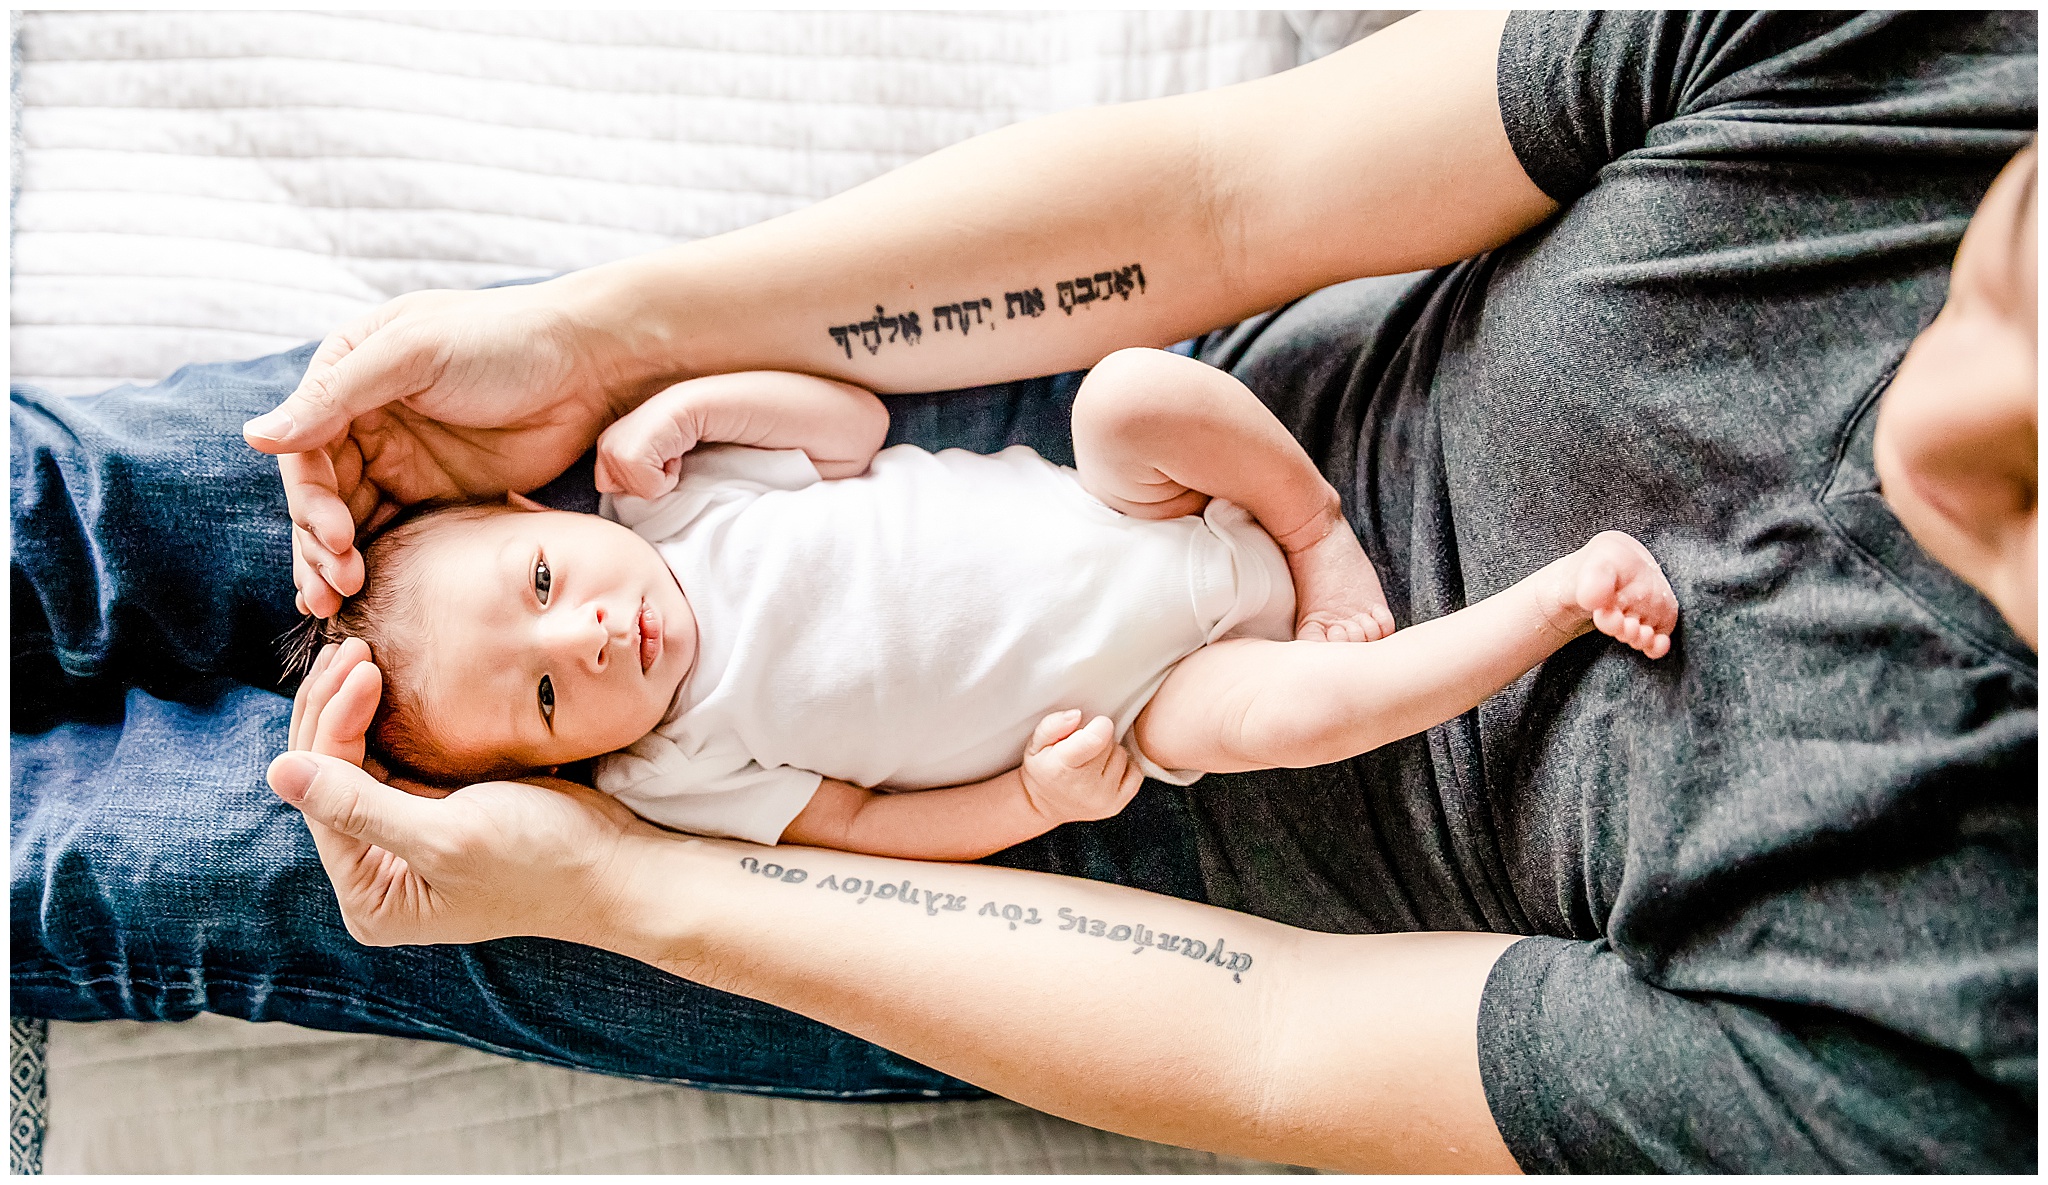 Tattoo and Newborn Photos by DC Photographer Kofmehl Photography